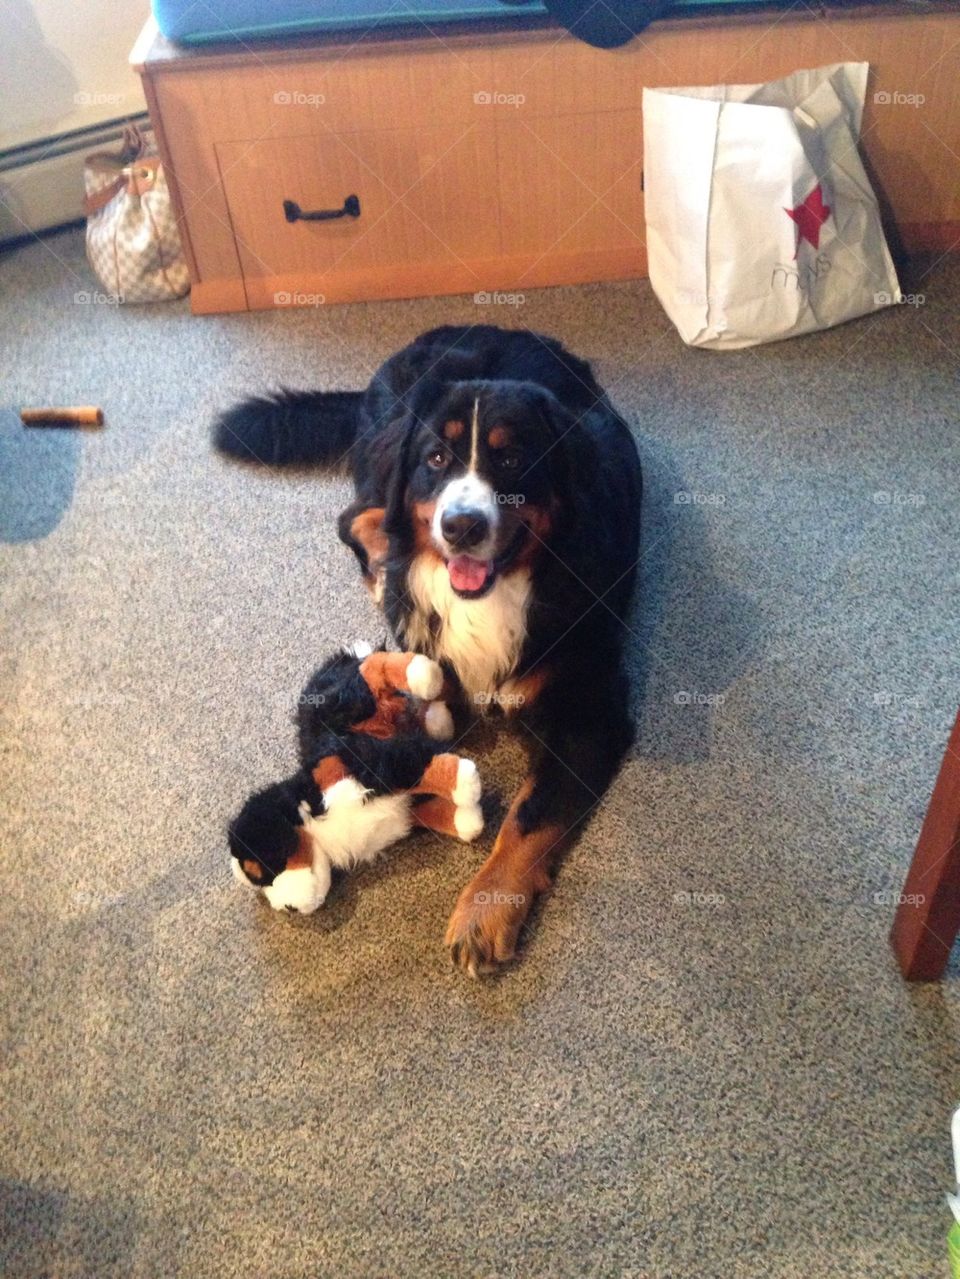 Puppy with his puppy. Rocky the Bernese mountain dog loves his new puppy!